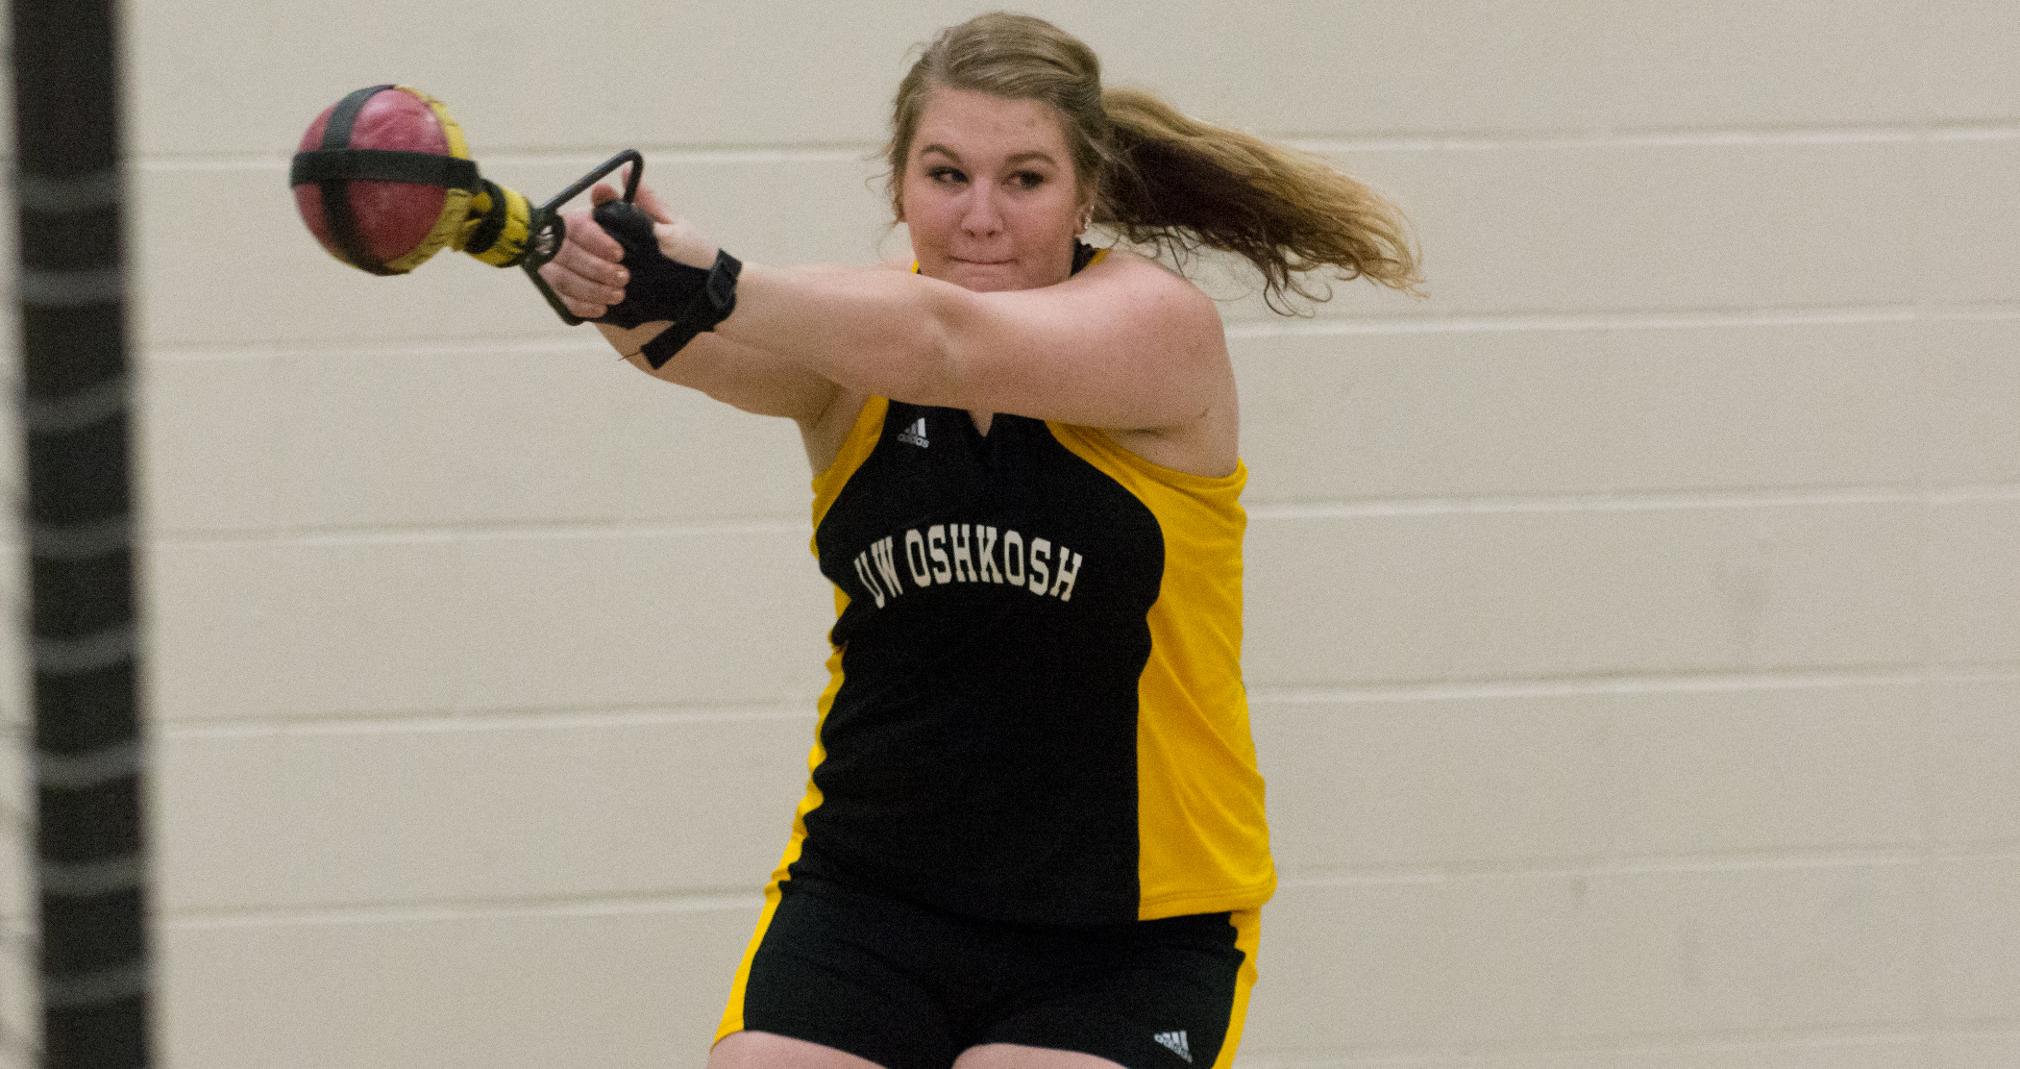 Elizabeth Abhold finished second in the 20-pound weight throw and sixth in the shot put.